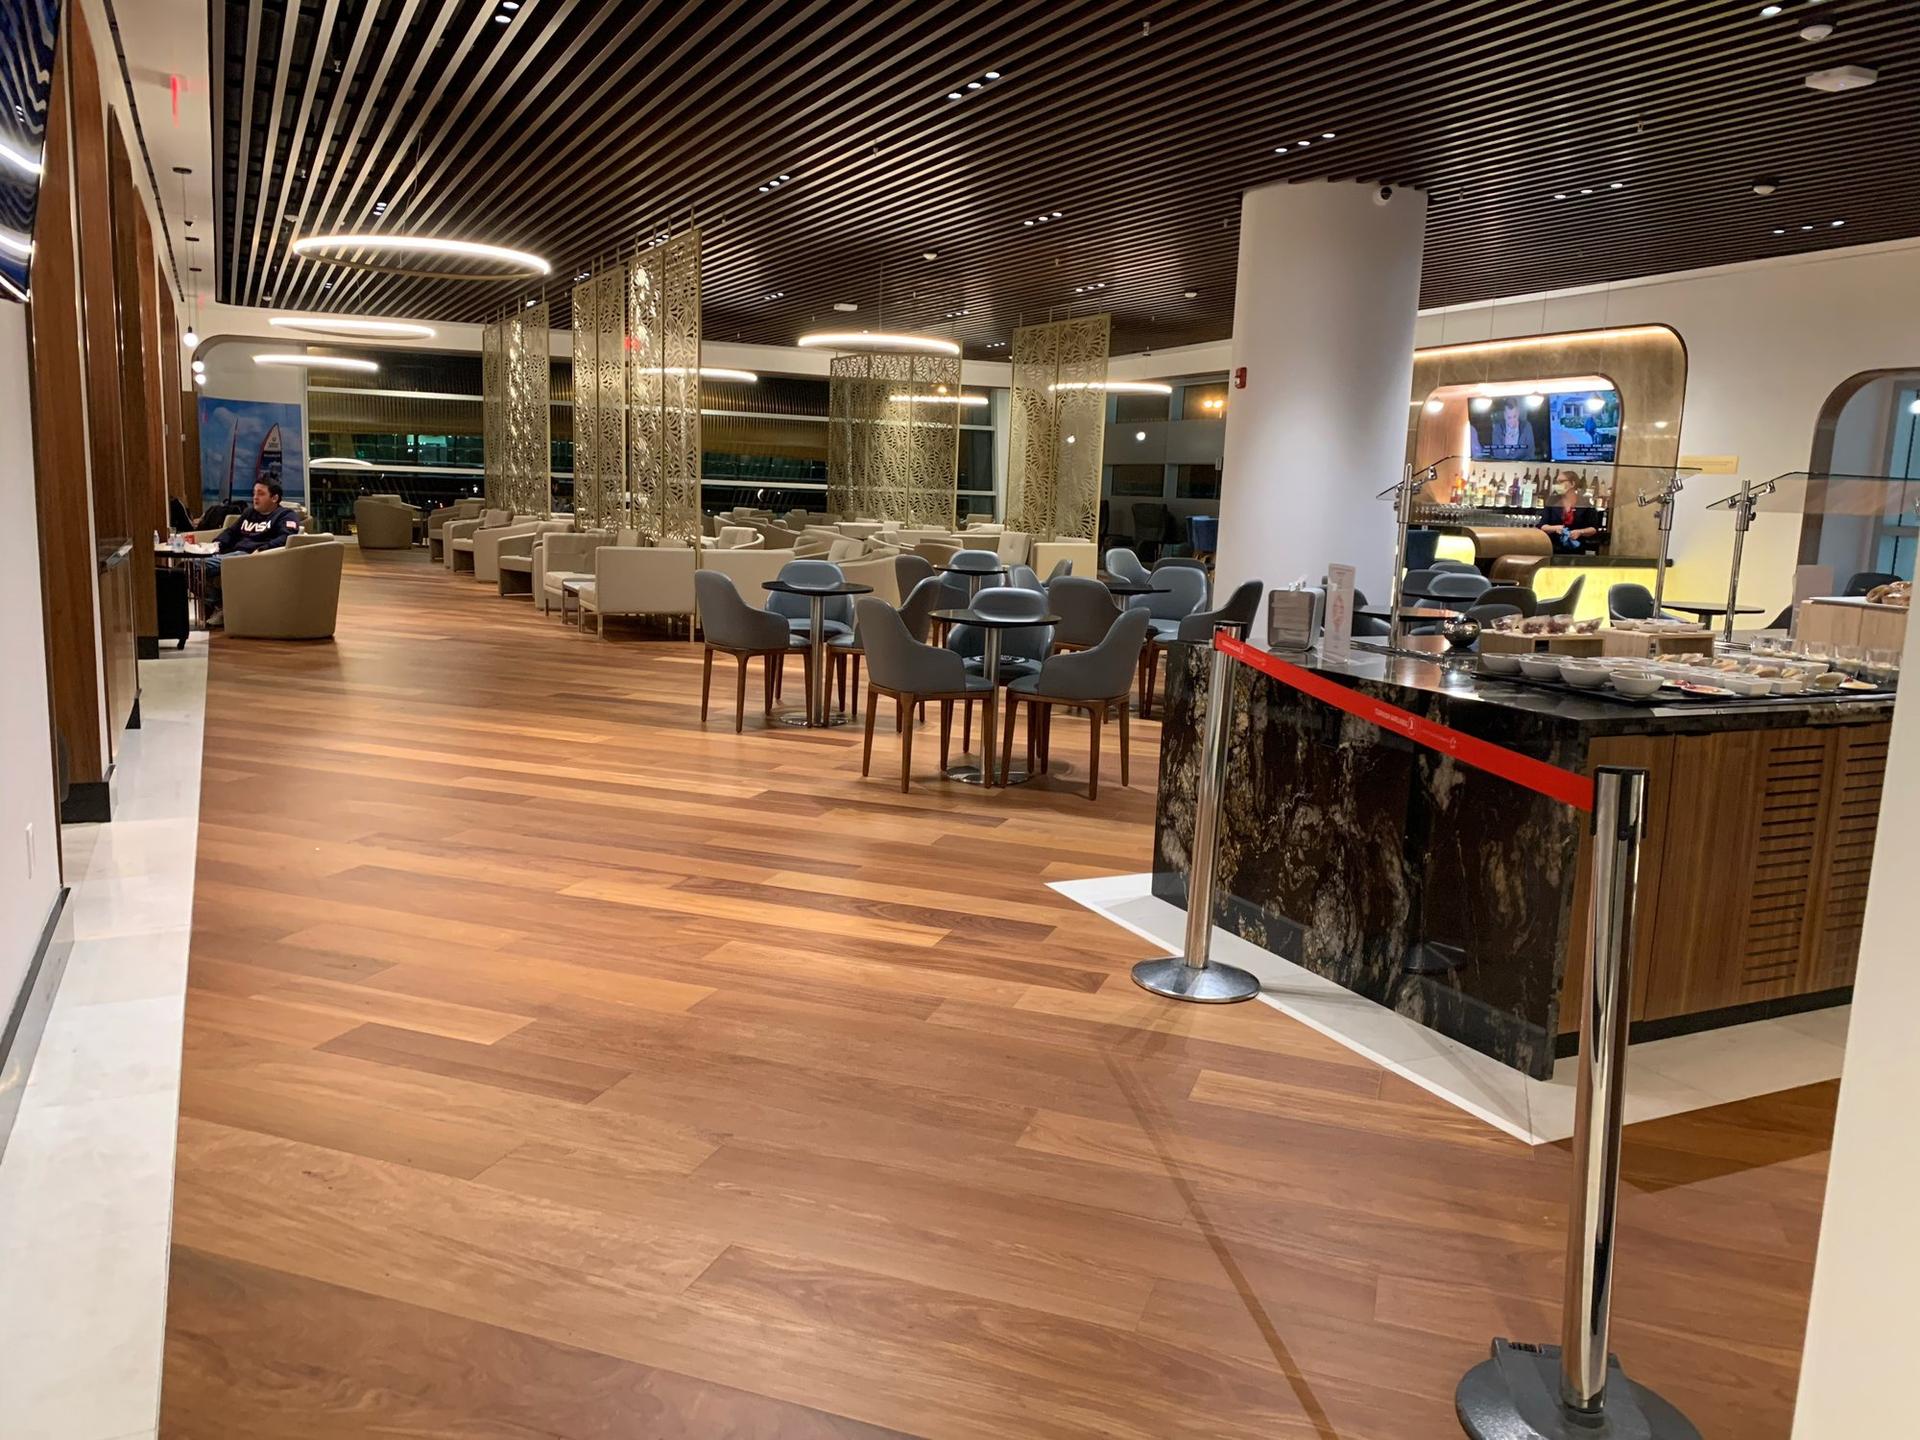 Turkish Airlines Lounge image 2 of 8